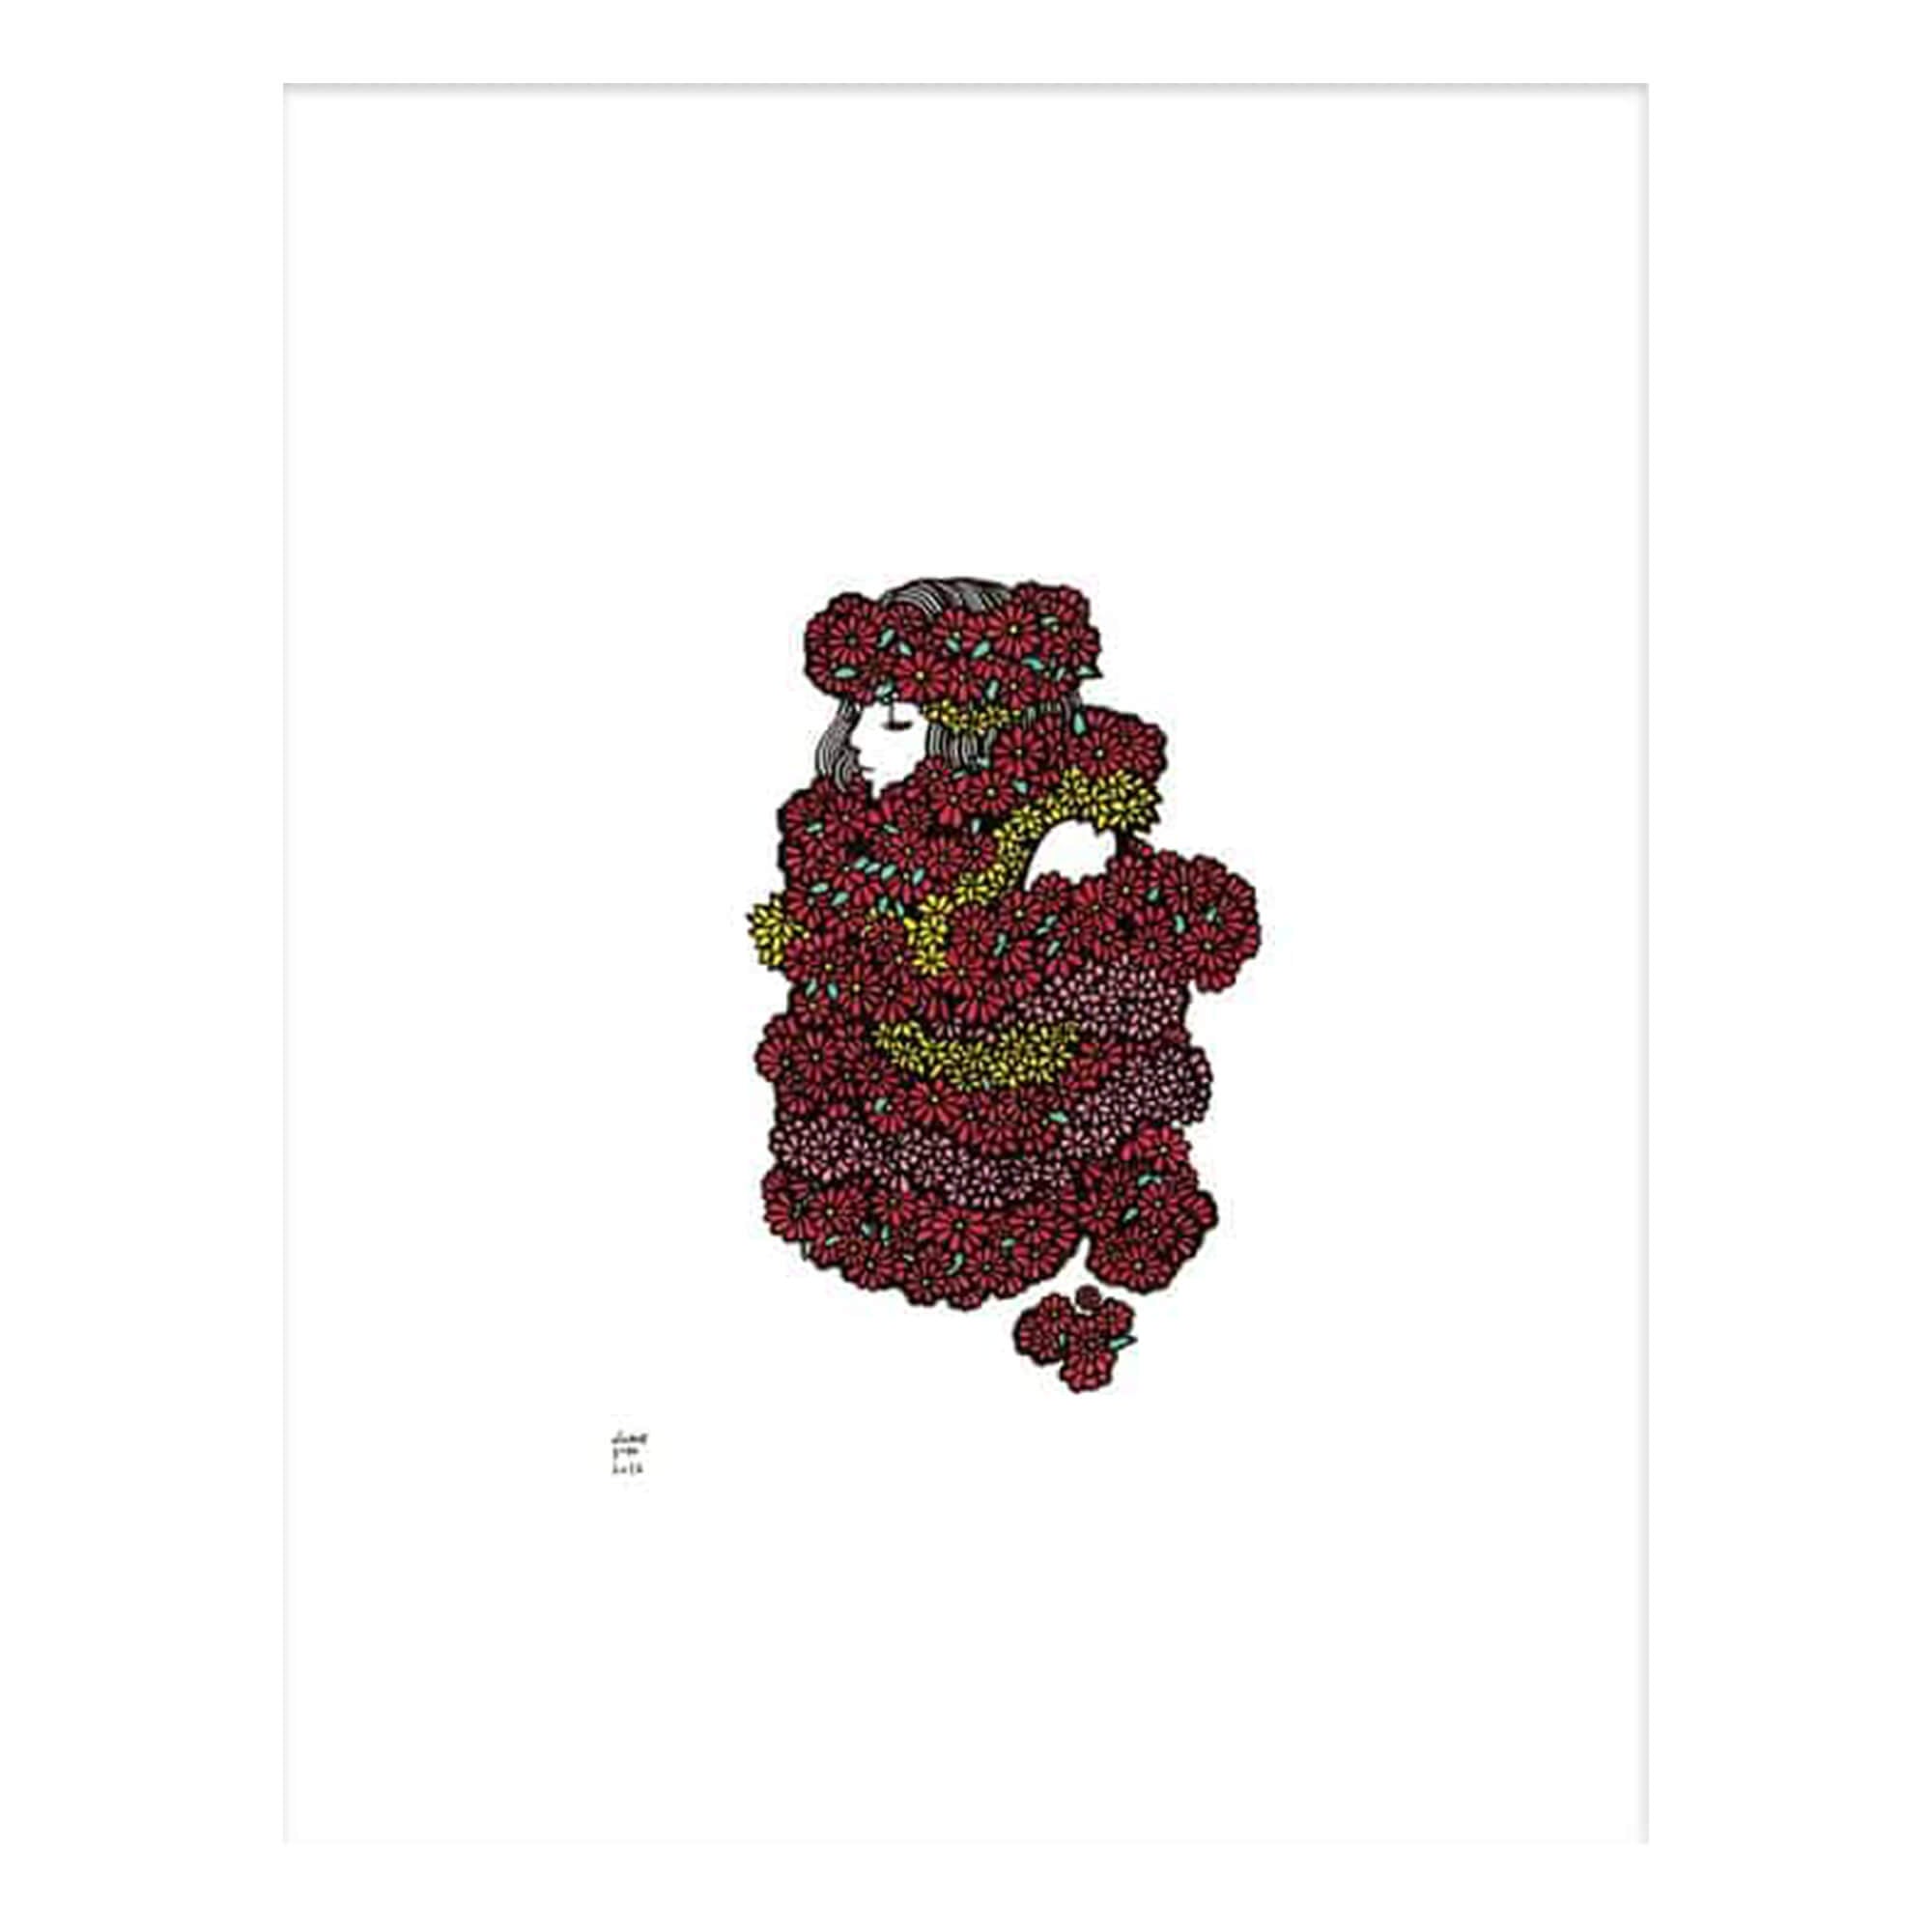 A matted art print of a woman adorned in red, pink, and yellow lei by Hawaii artist Kris Goto